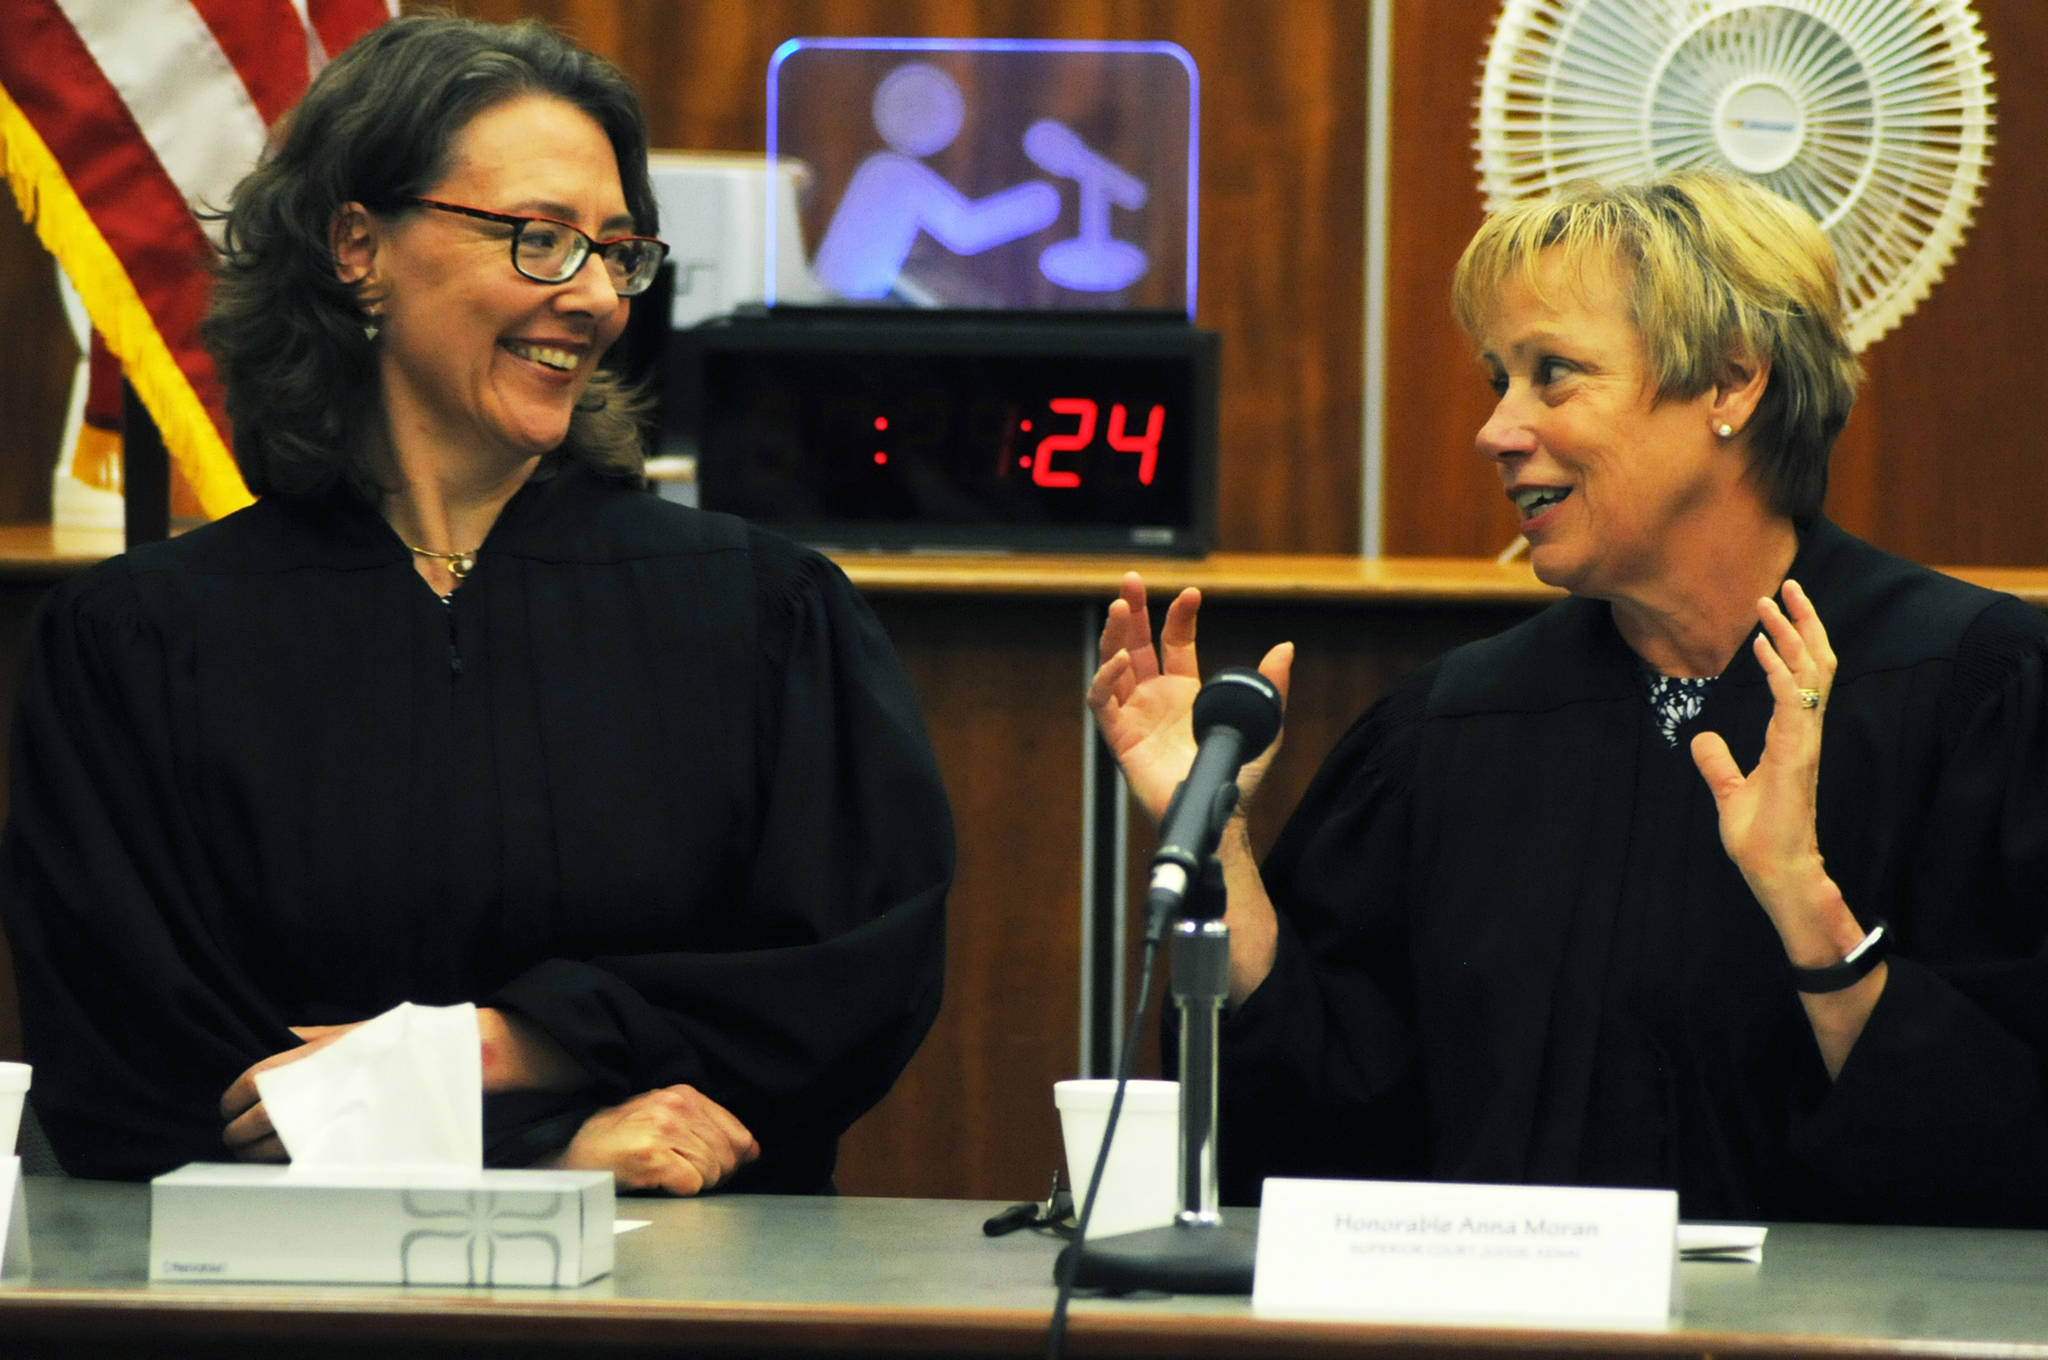 Kenai Superior Court Judge Anna Moran (right) offers congratulations and advice to newly installed Superior Court Judge Jennifer Wells (left) during Wells’ installation ceremony Thursday, July 27, 2017 in Kenai, Alaska. Wells, a 22-year veteran of the Alaska court system, replaces former Superior Court Judge Carl Bauman, who retired in February. (Photo by Elizabeth Earl/Peninsula Clarion)